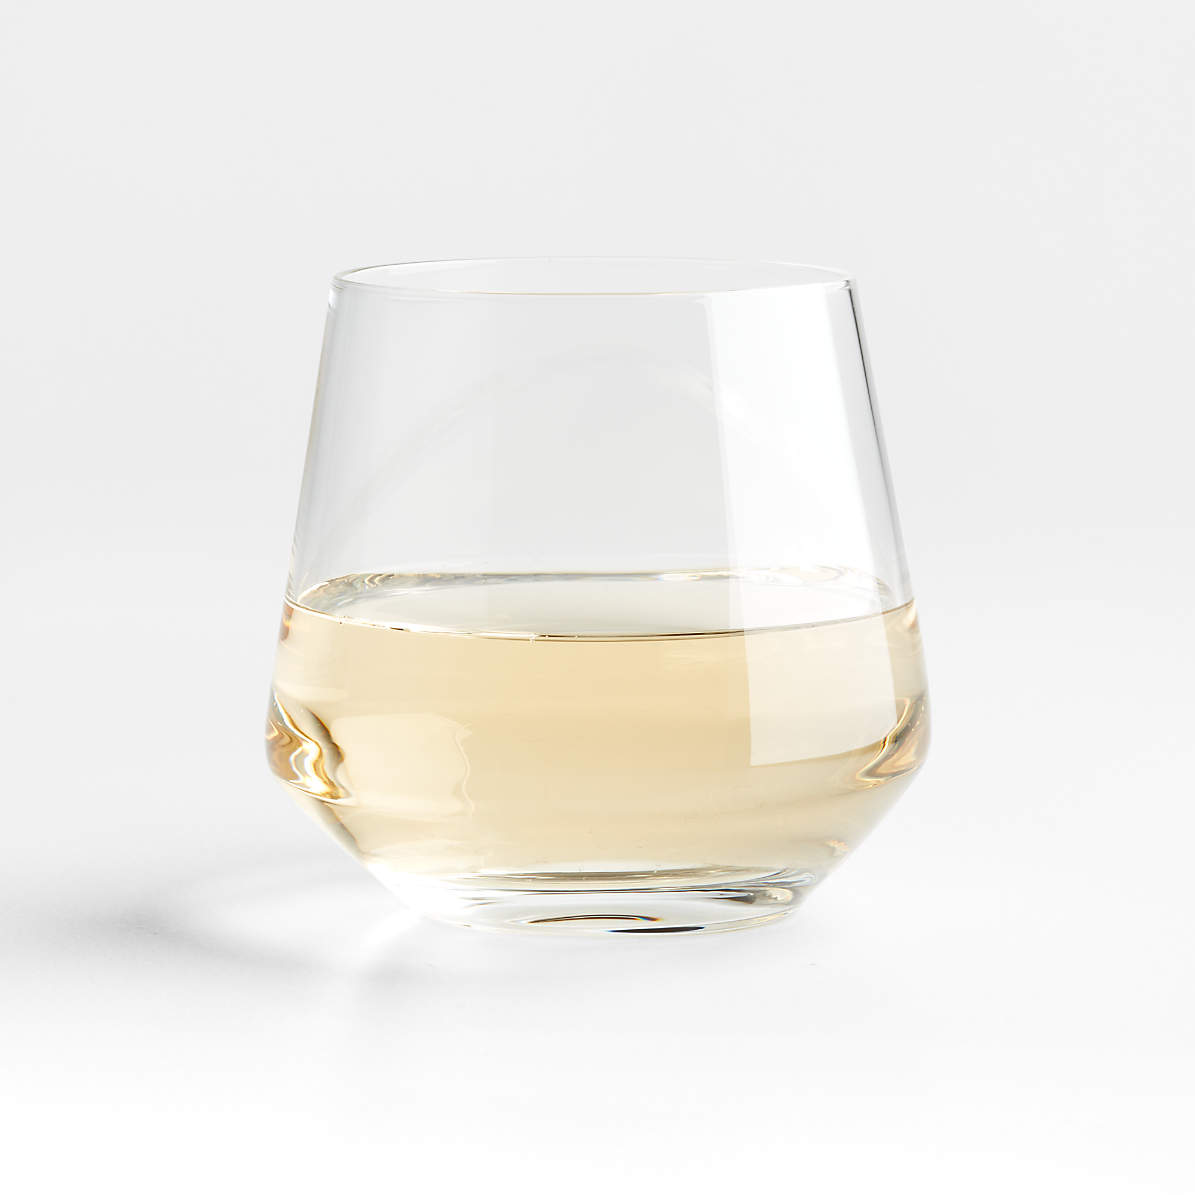 Riedel Stemless Wine Glass, Stacked Logo - Berea College Visitor